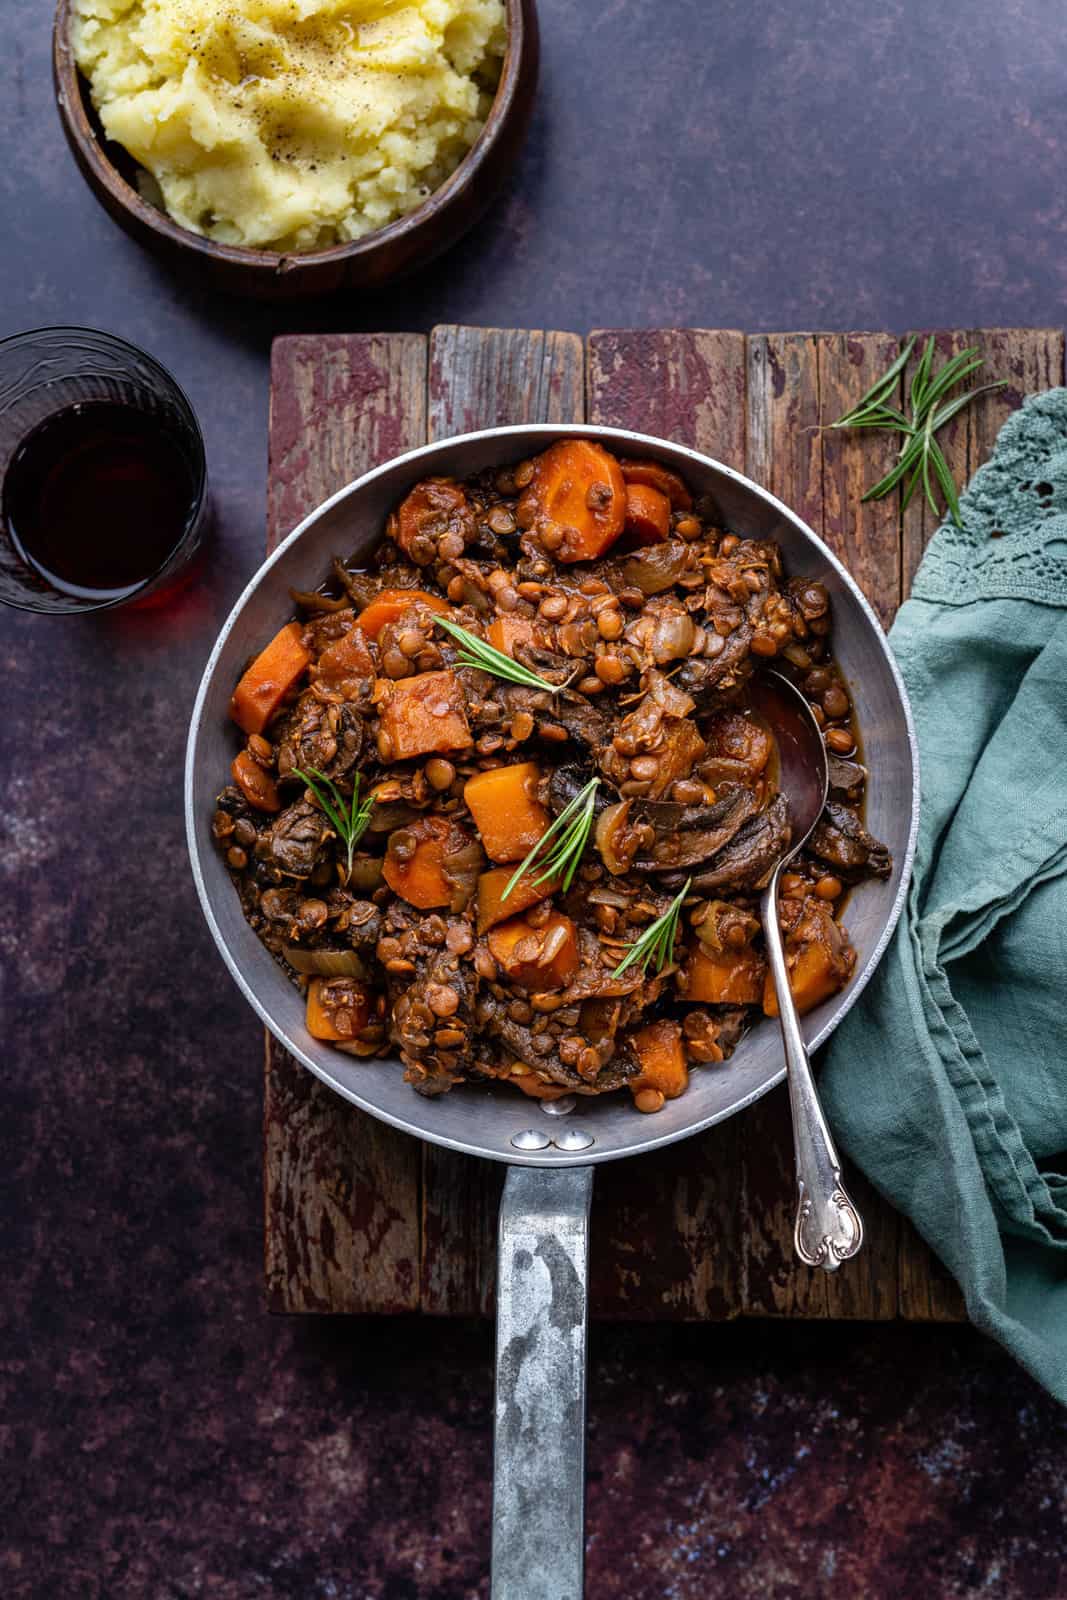 Vegan stew garnished with rosemary in a small pan